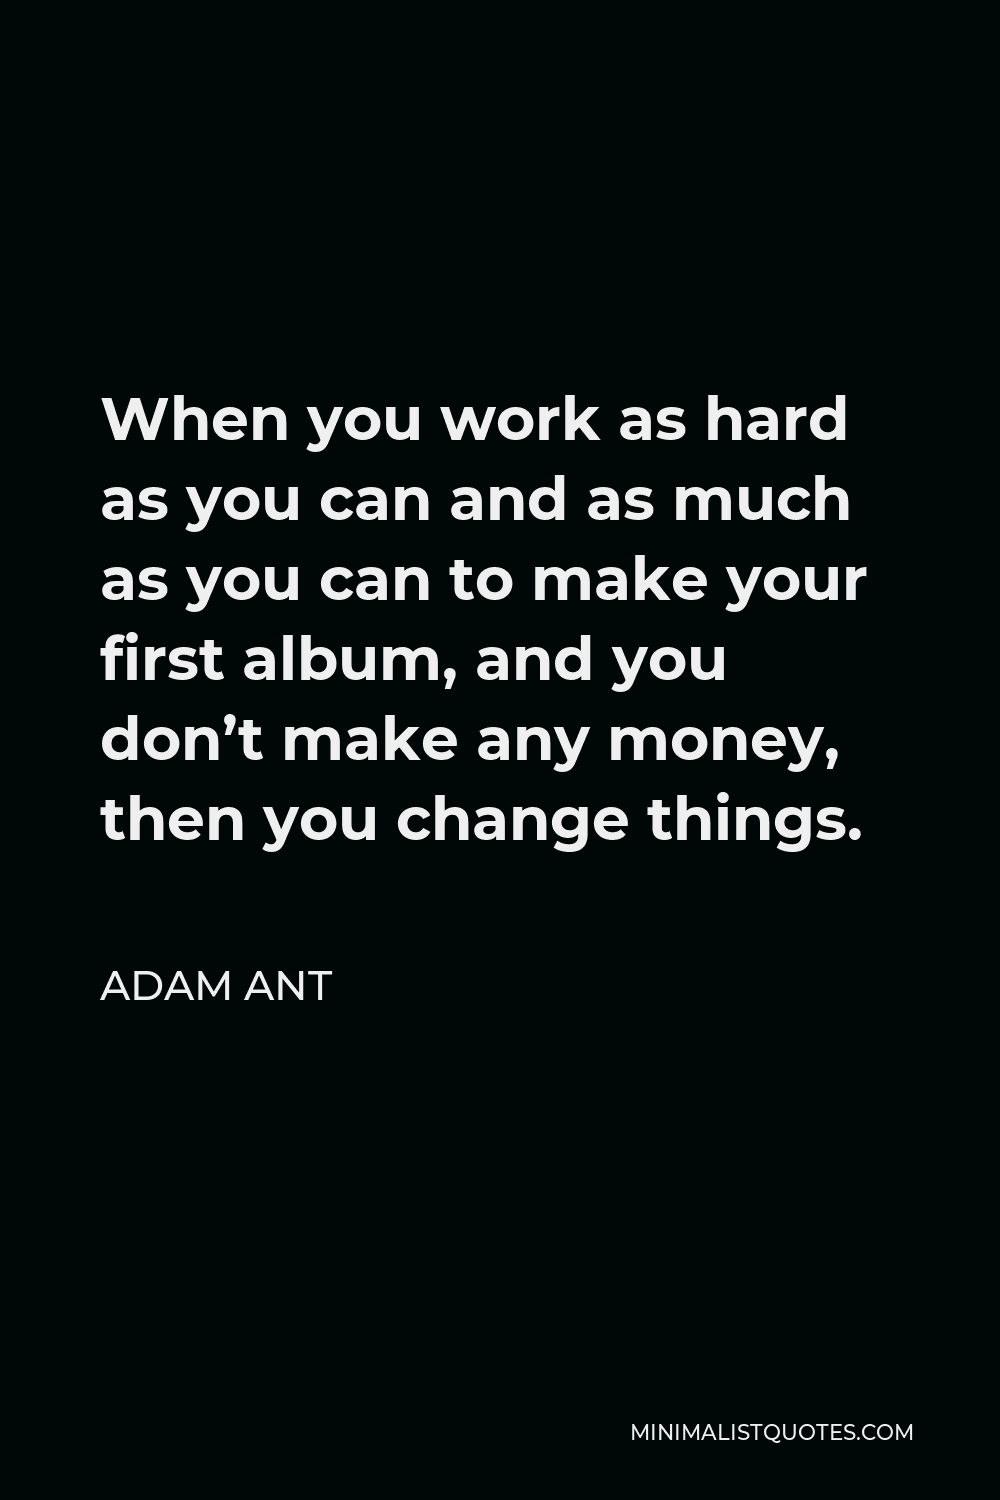 Adam Ant Quote - When you work as hard as you can and as much as you can to make your first album, and you don’t make any money, then you change things.